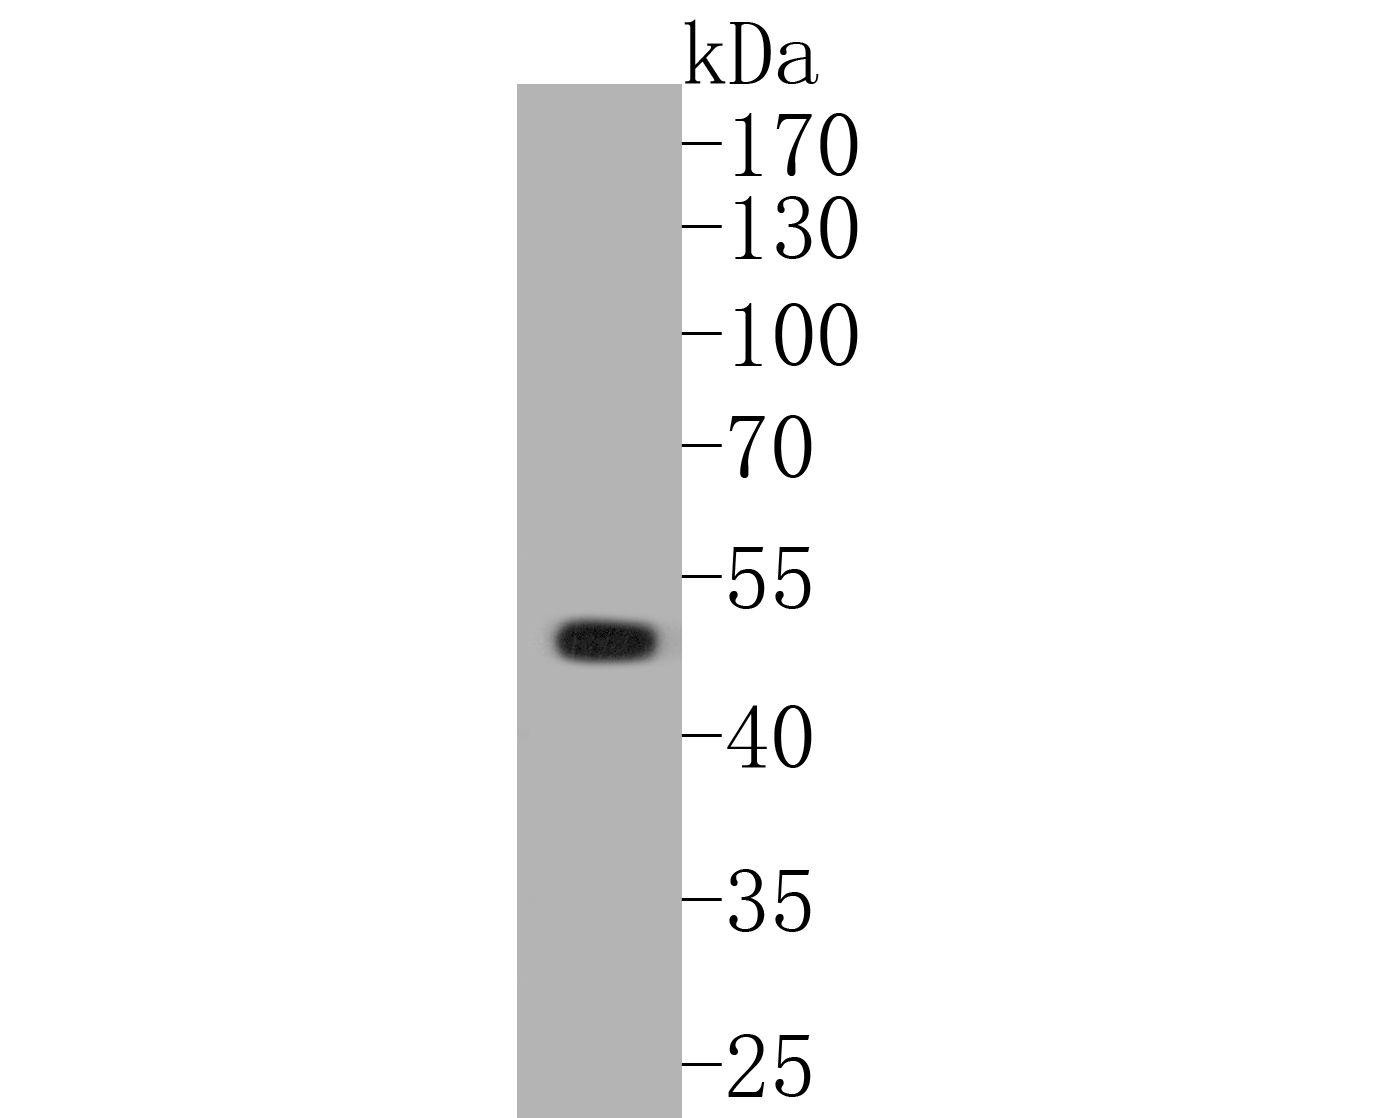 Western blot analysis of GABRA1 on rat cerebellum tissue lysates. Proteins were transferred to a PVDF membrane and blocked with 5% BSA in PBS for 1 hour at room temperature. The primary antibody (ER1901-59, 1/1000) was used in 5% BSA at room temperature for 2 hours. Goat Anti-Rabbit IgG - HRP Secondary Antibody (HA1001) at 1:5,000 dilution was used for 1 hour at room temperature.